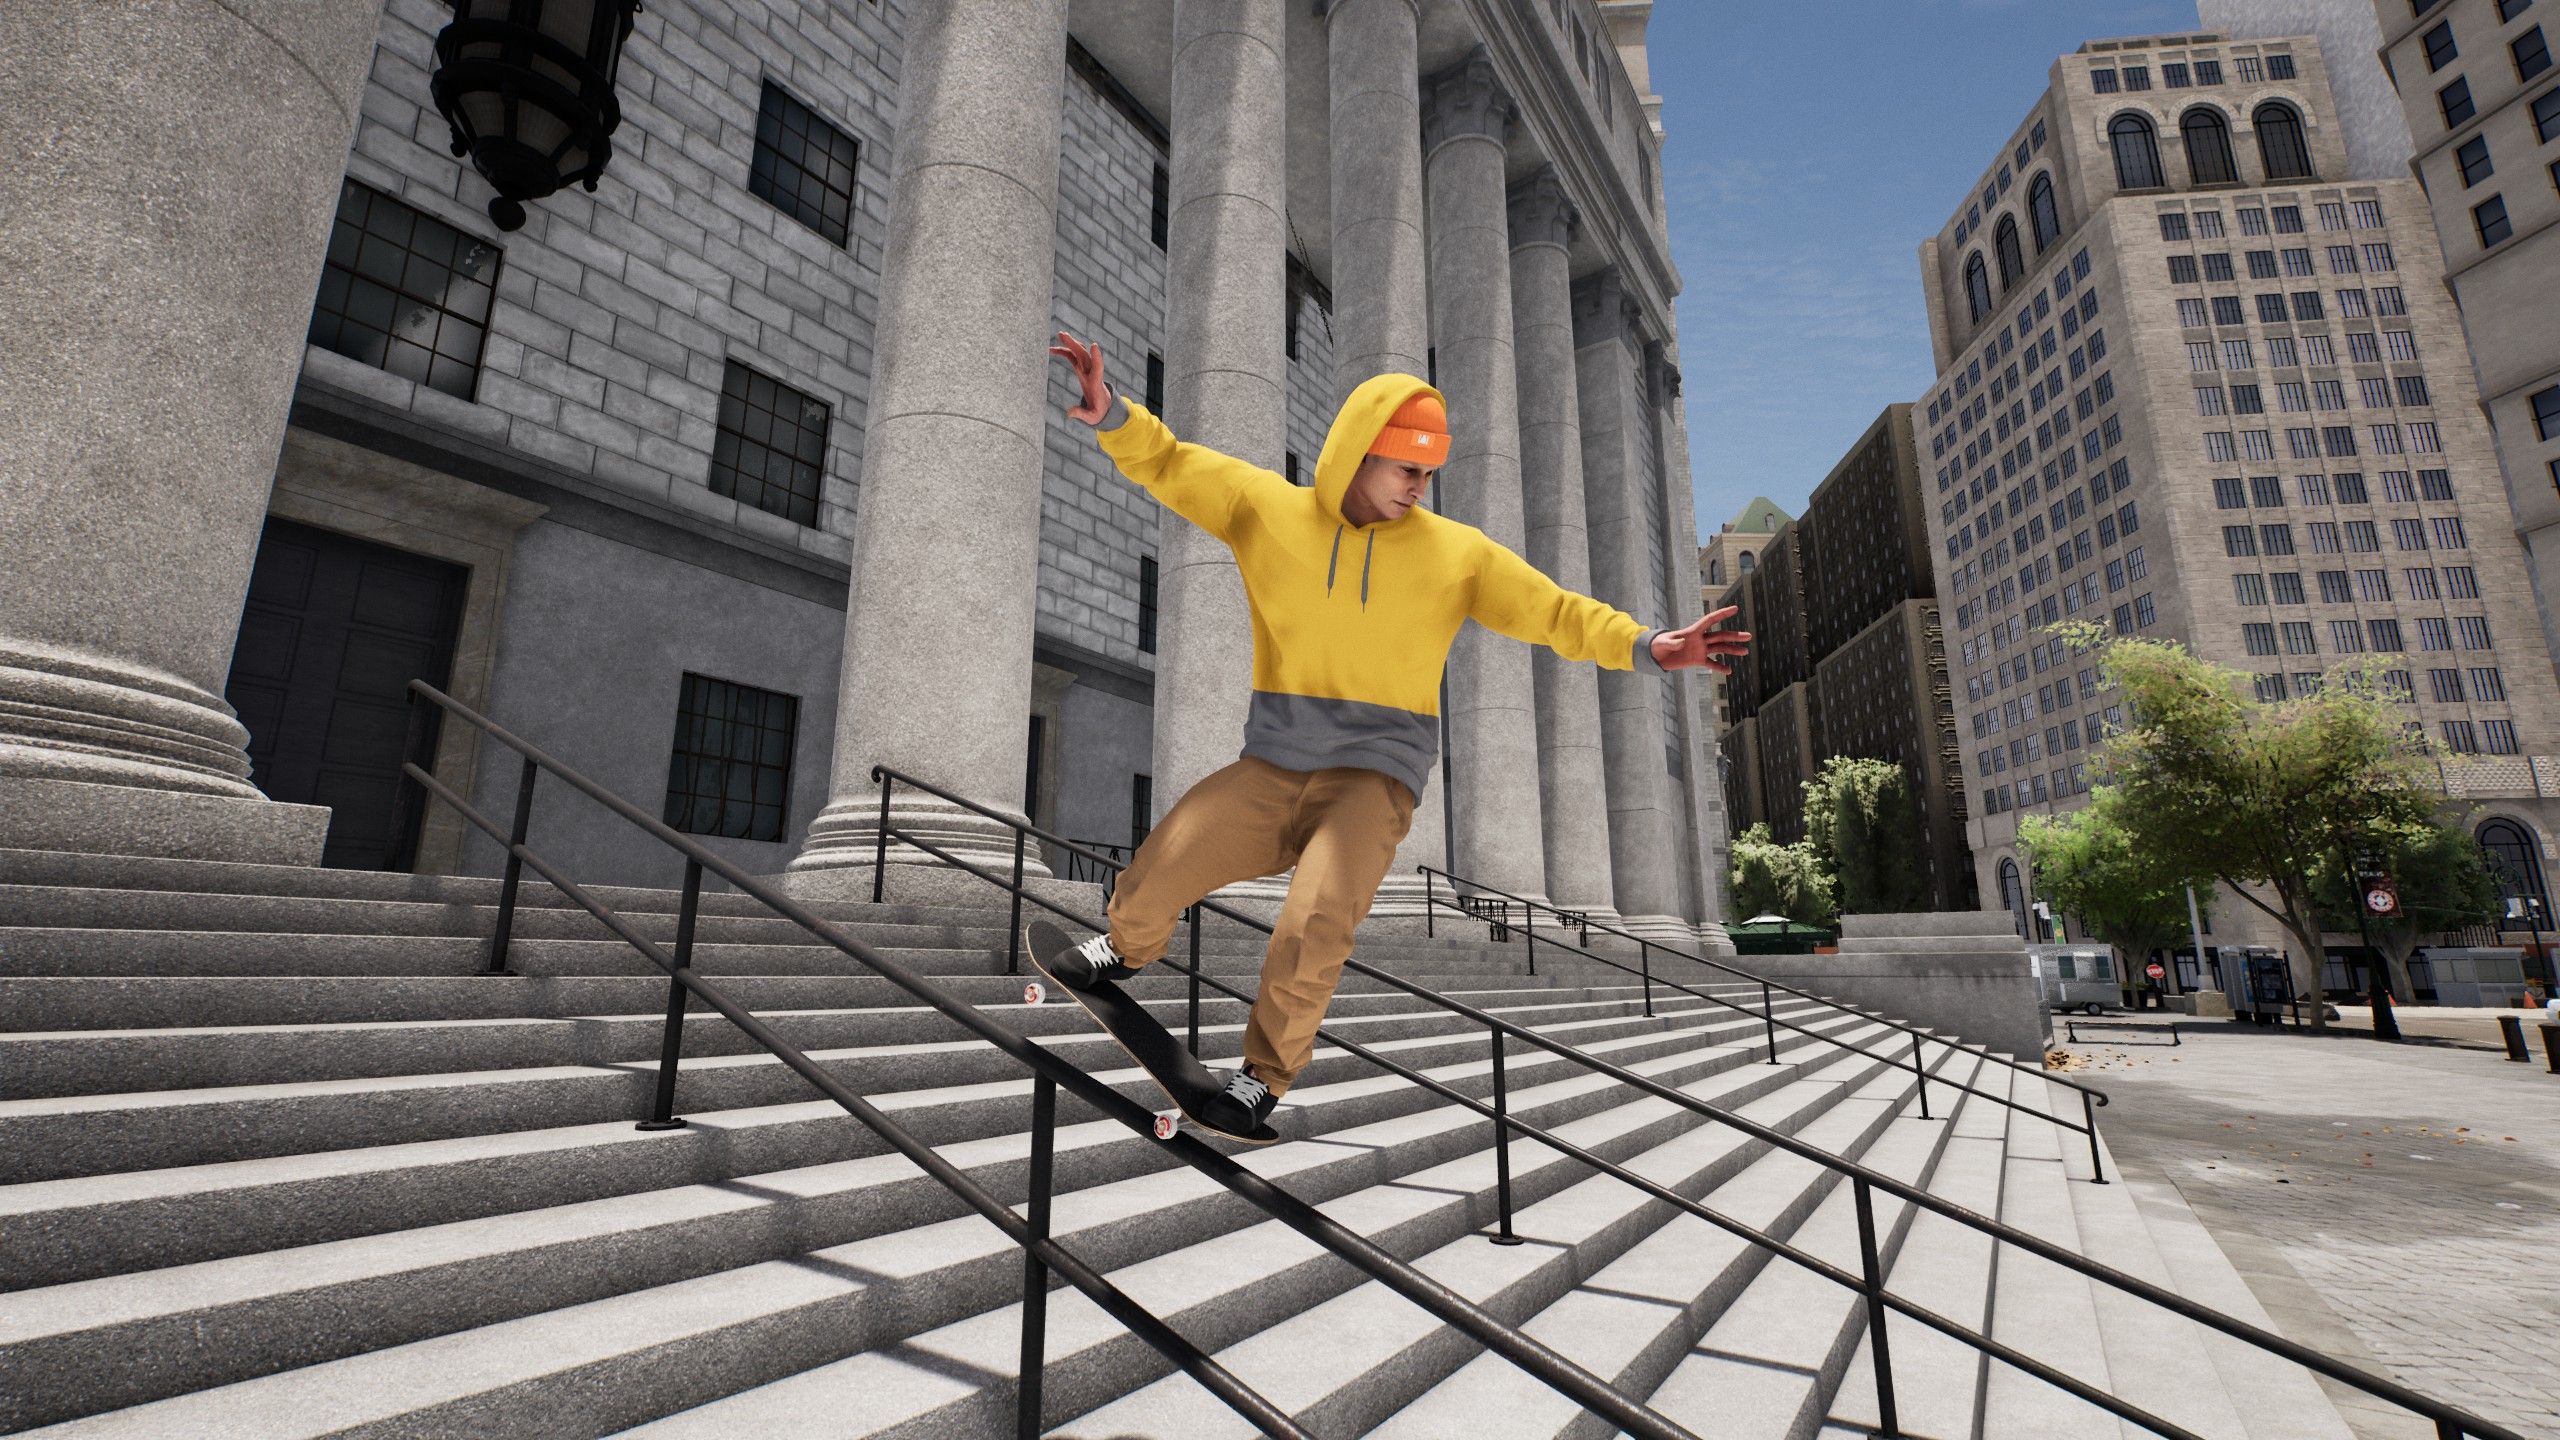 A skater in a yellow hoodie grinds down a stair rail in Session